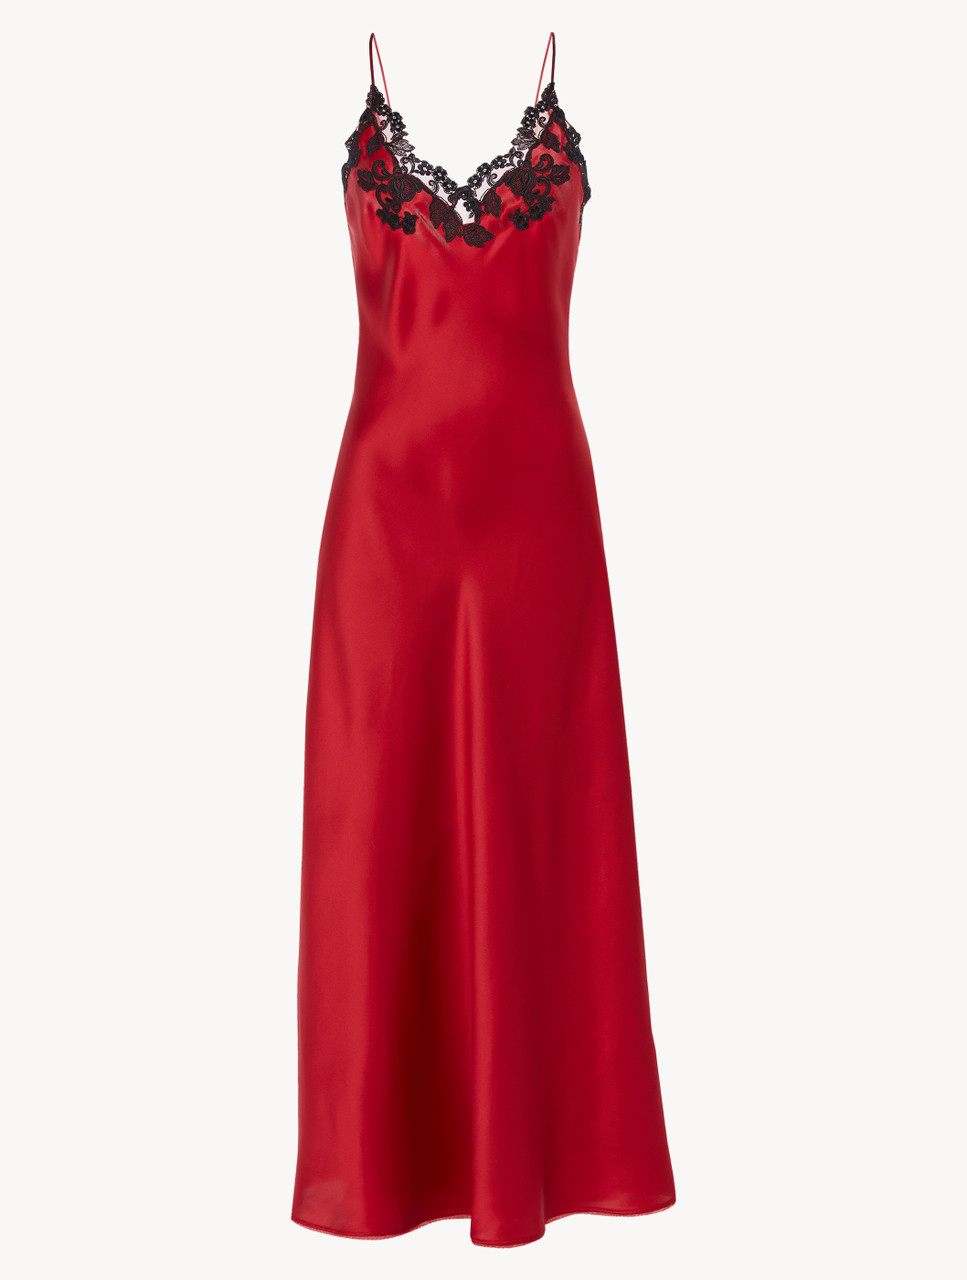 Luxury Silk Long Nightgown in Red with Frastaglio